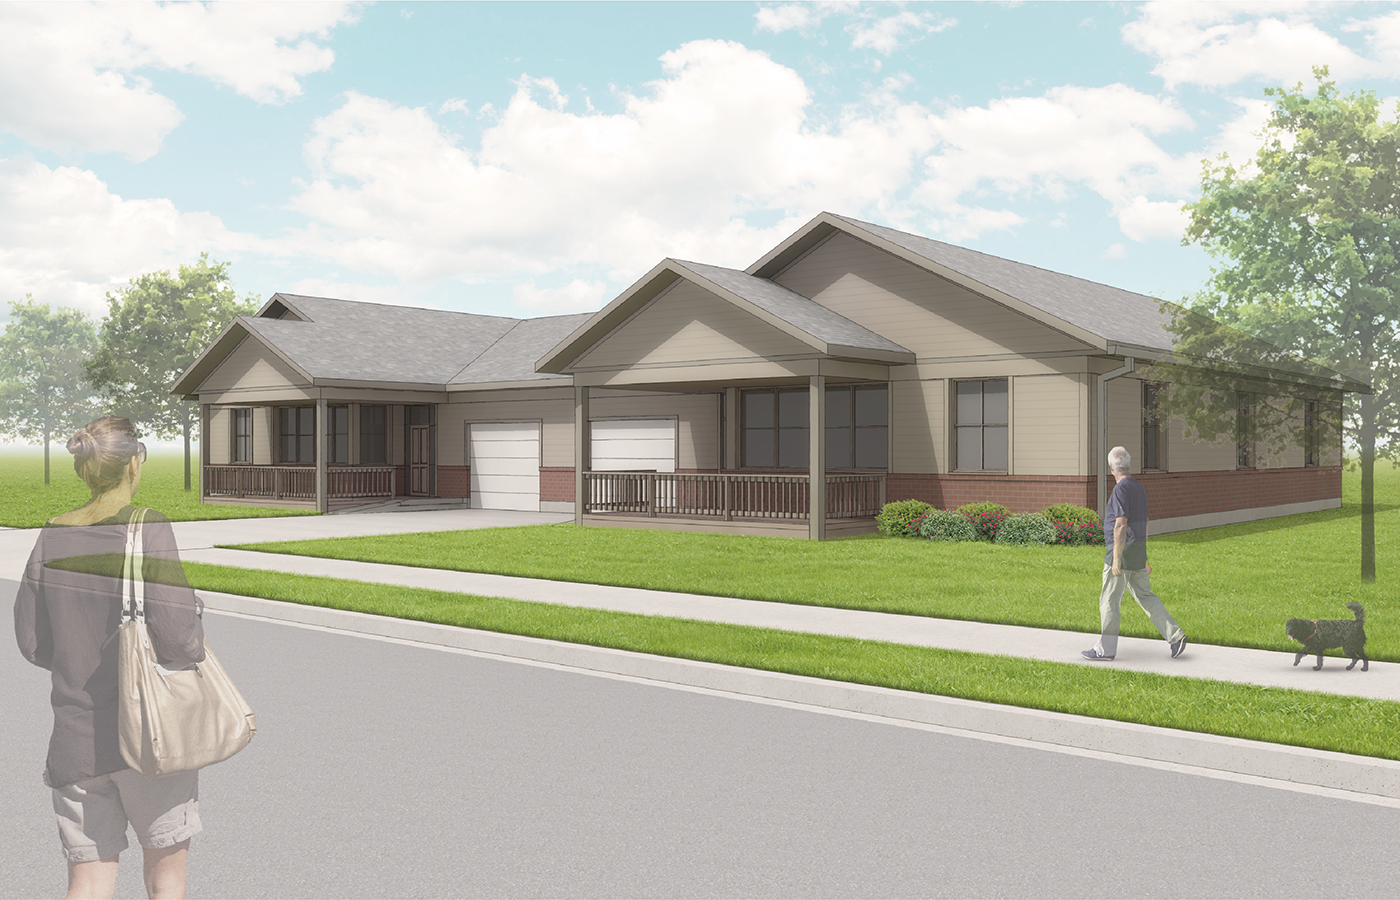 New Home for Adults with Behavior Support Needs Breaks Ground in May